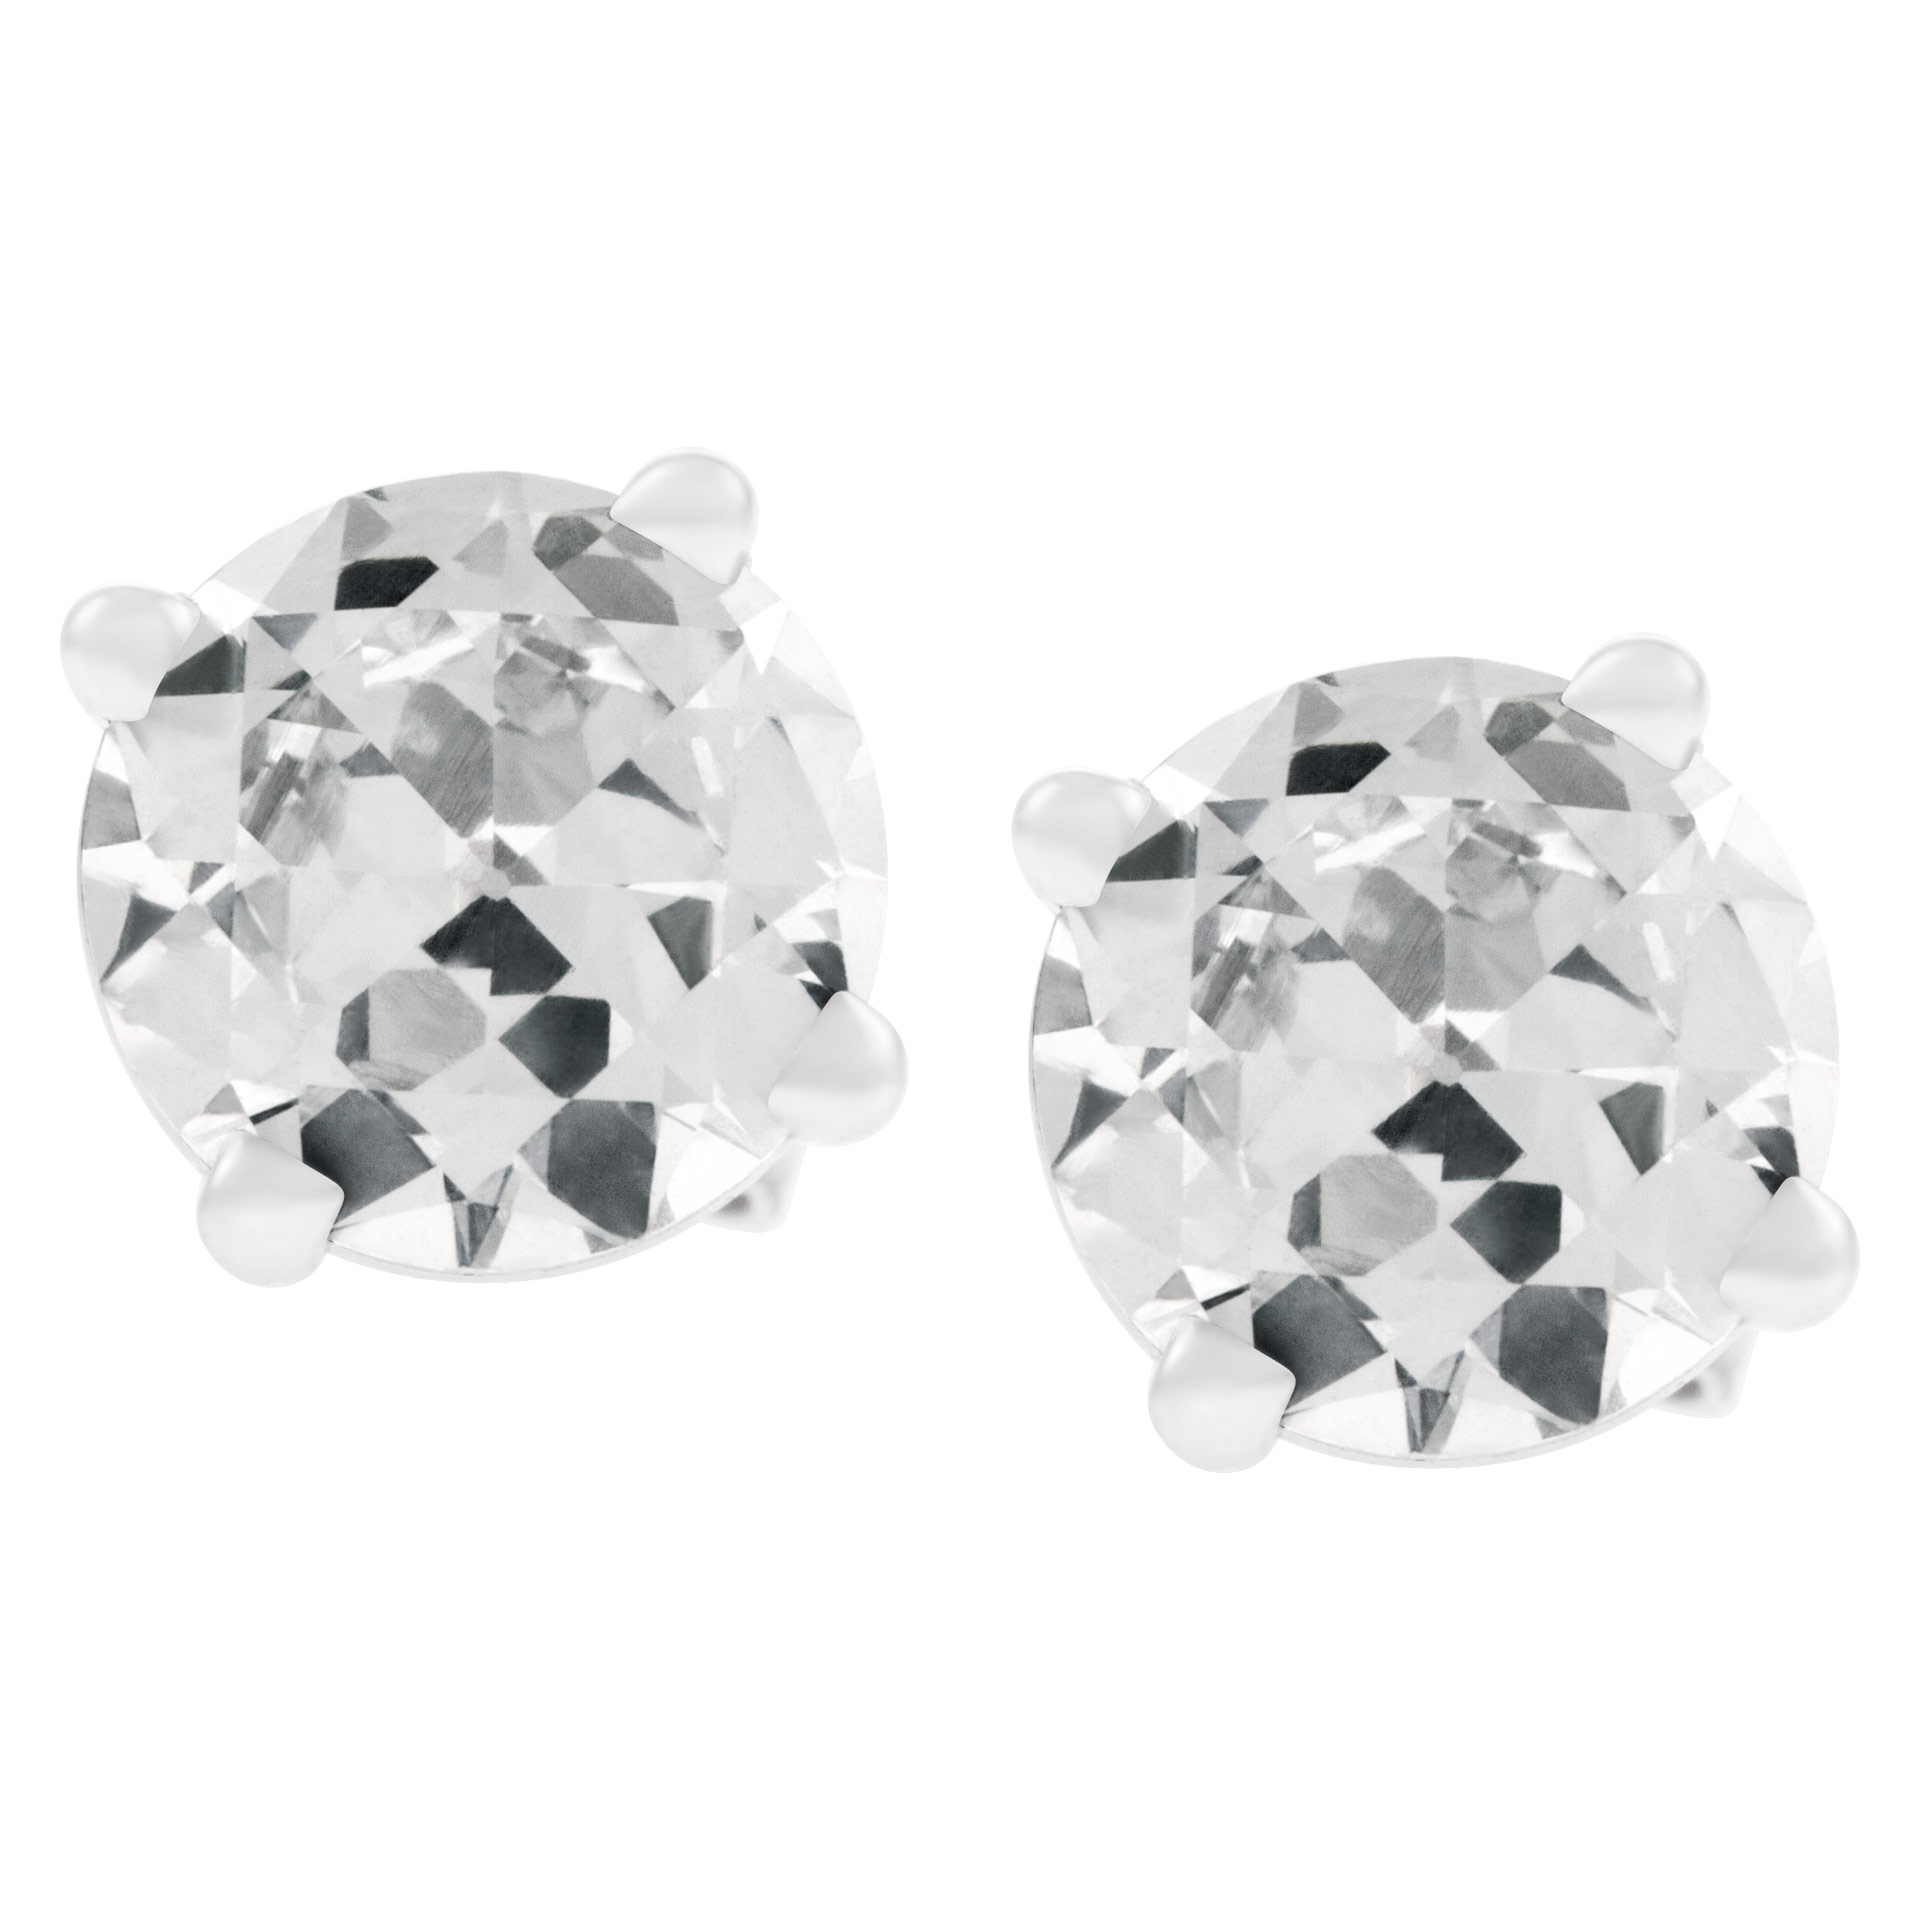 GIA Certified Round Diamond Studs .93 cts F Color VS Clarity .89cts E Color SI-1 Clarity image 1